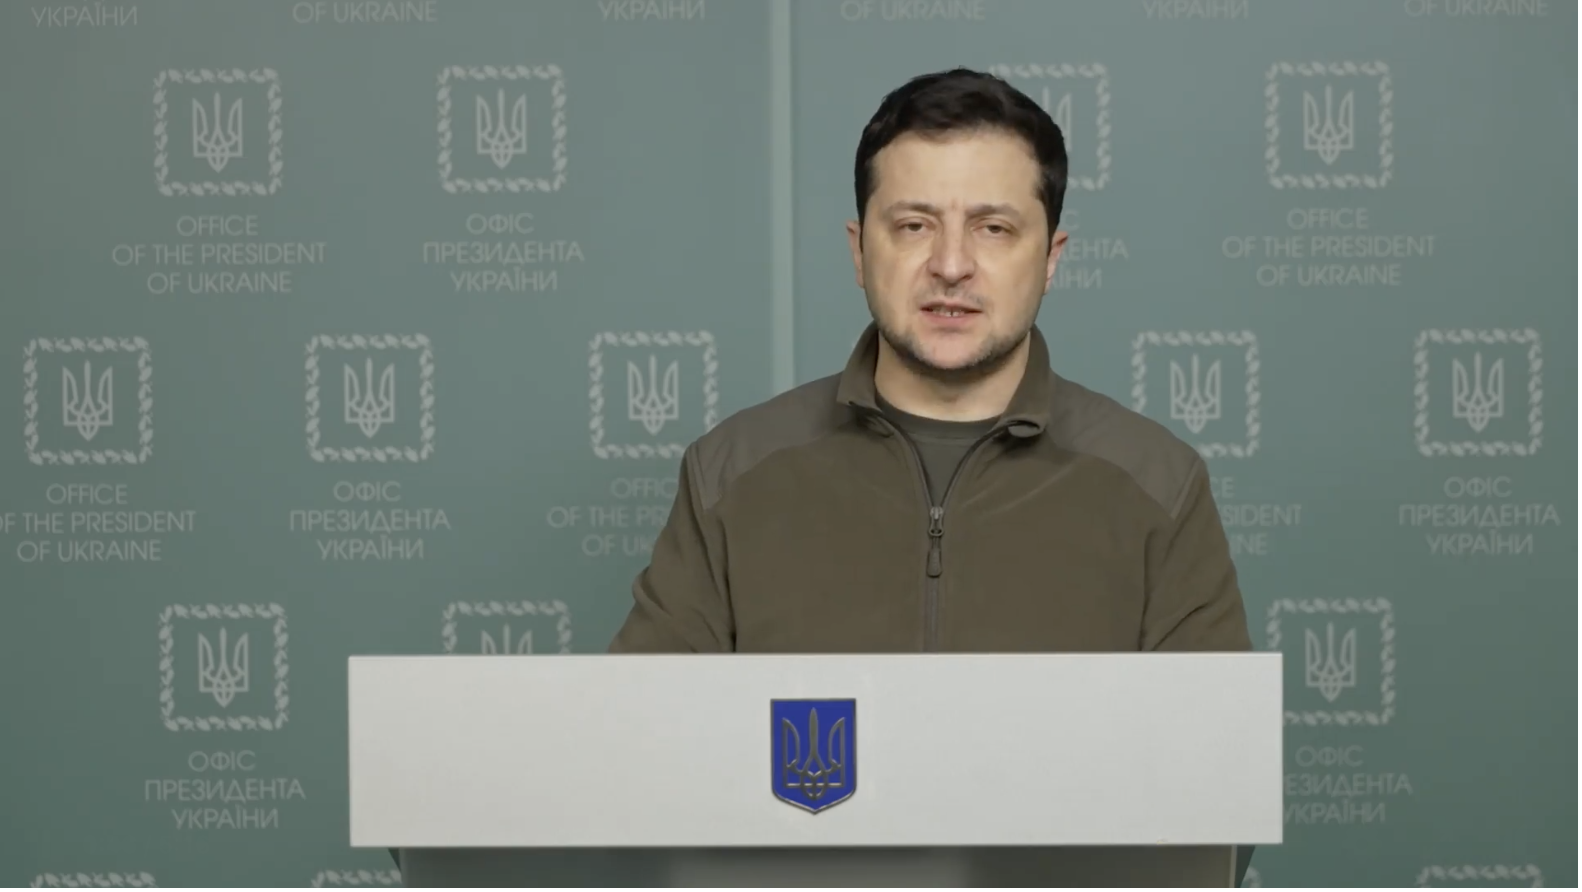 Ukrainian President Volodymyr Zelensky delivers a video message to the people of Ukraine on February 26.